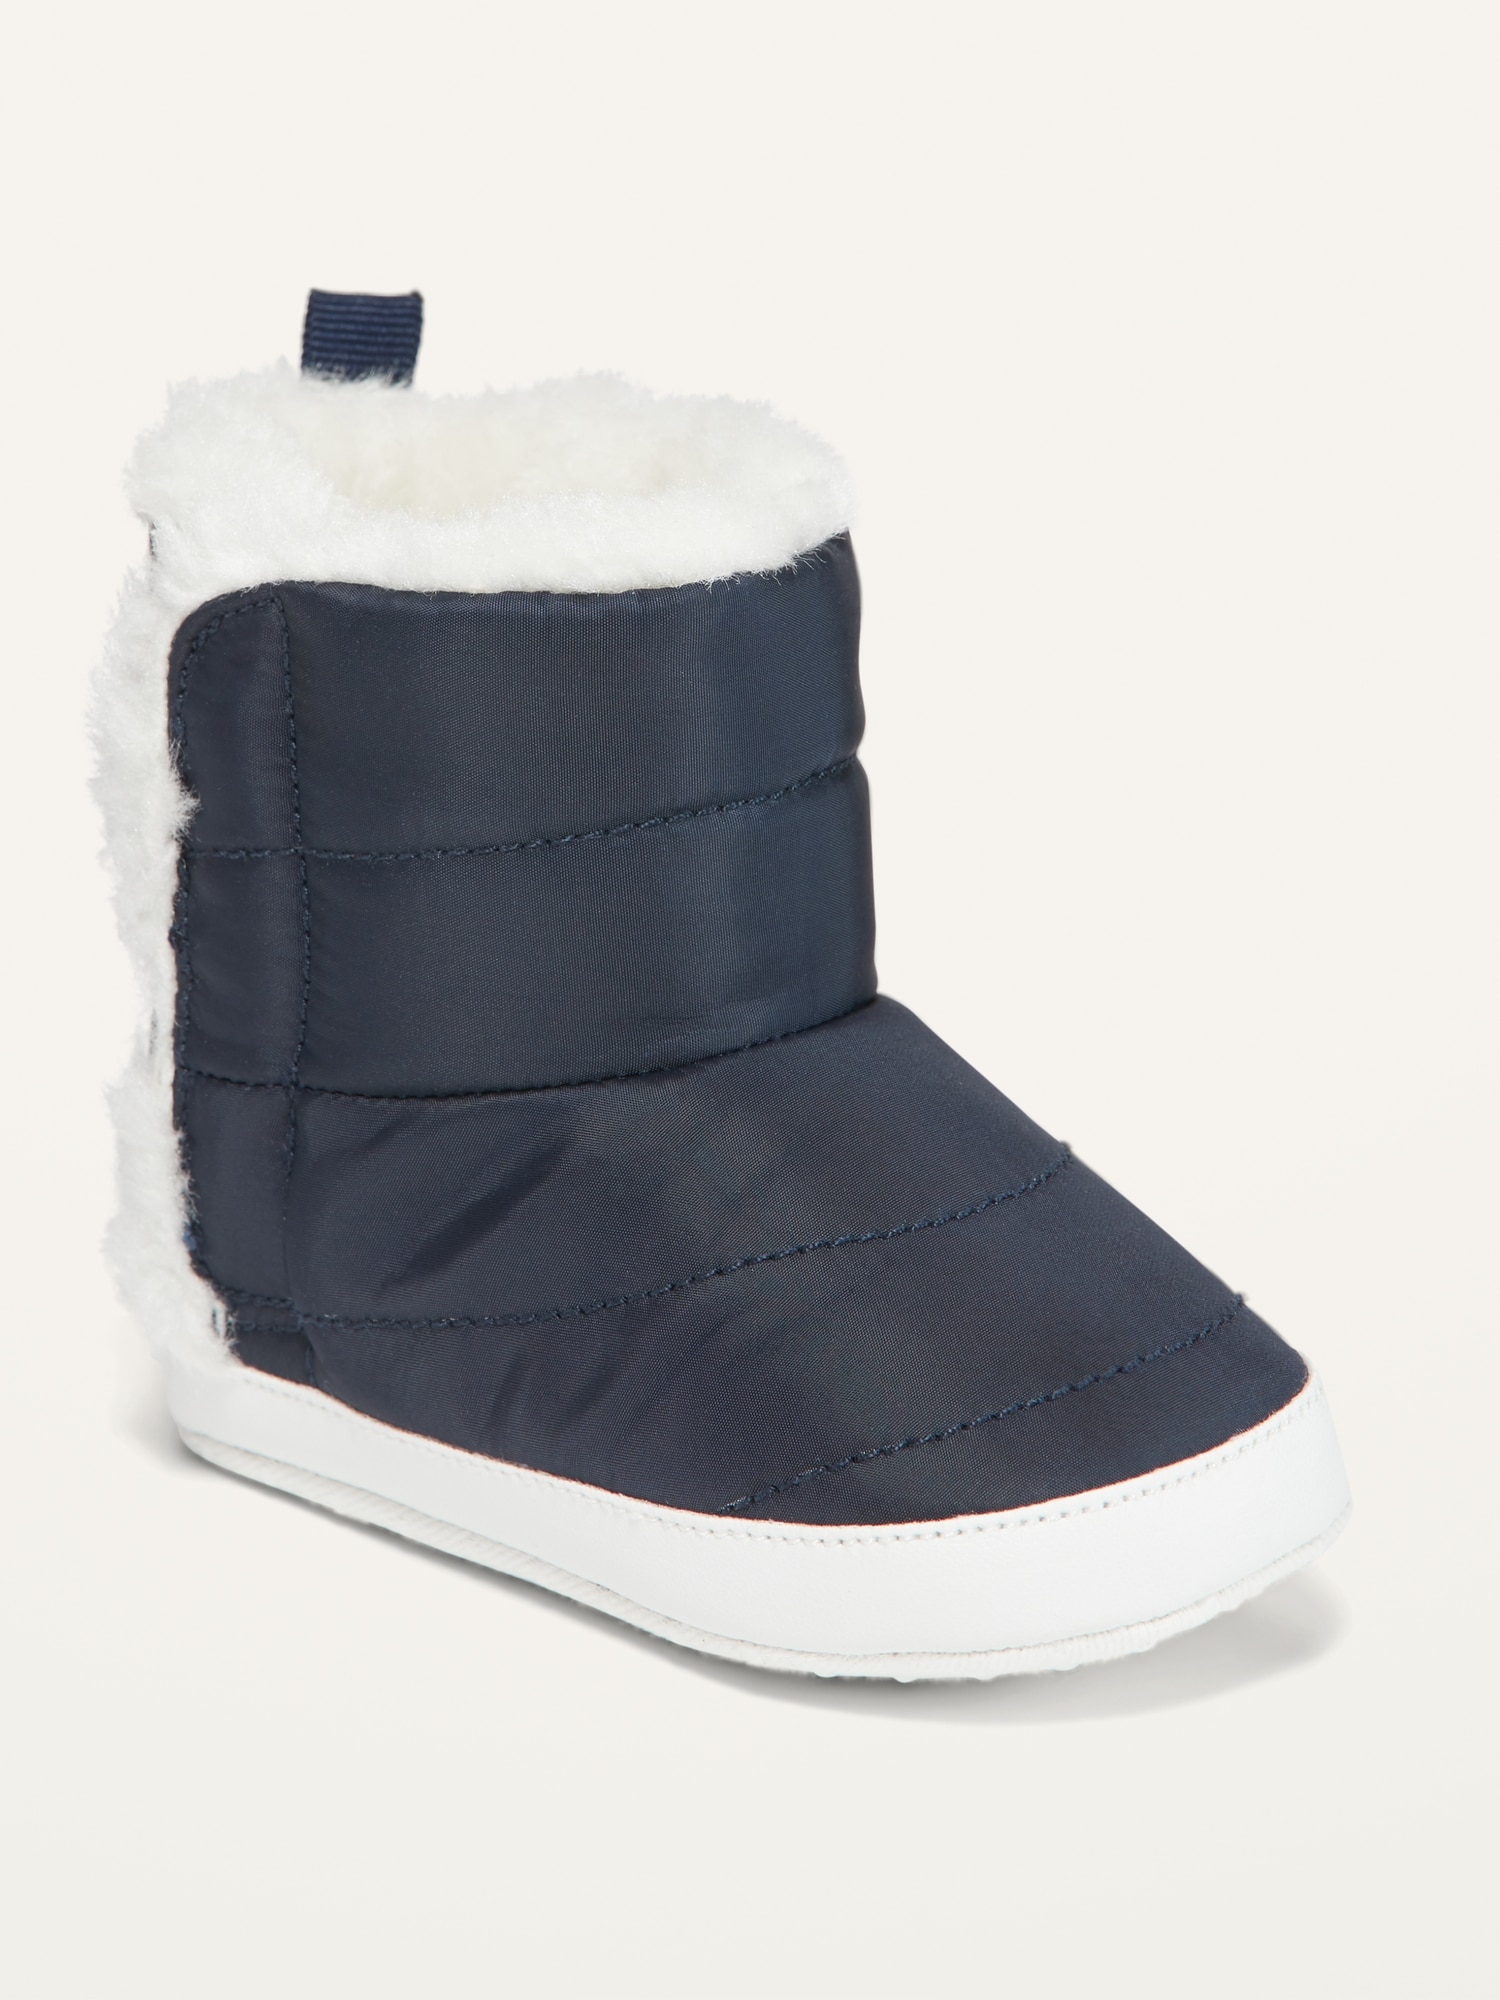 Unisex Sherpa-Lined Nylon Snow Boots 